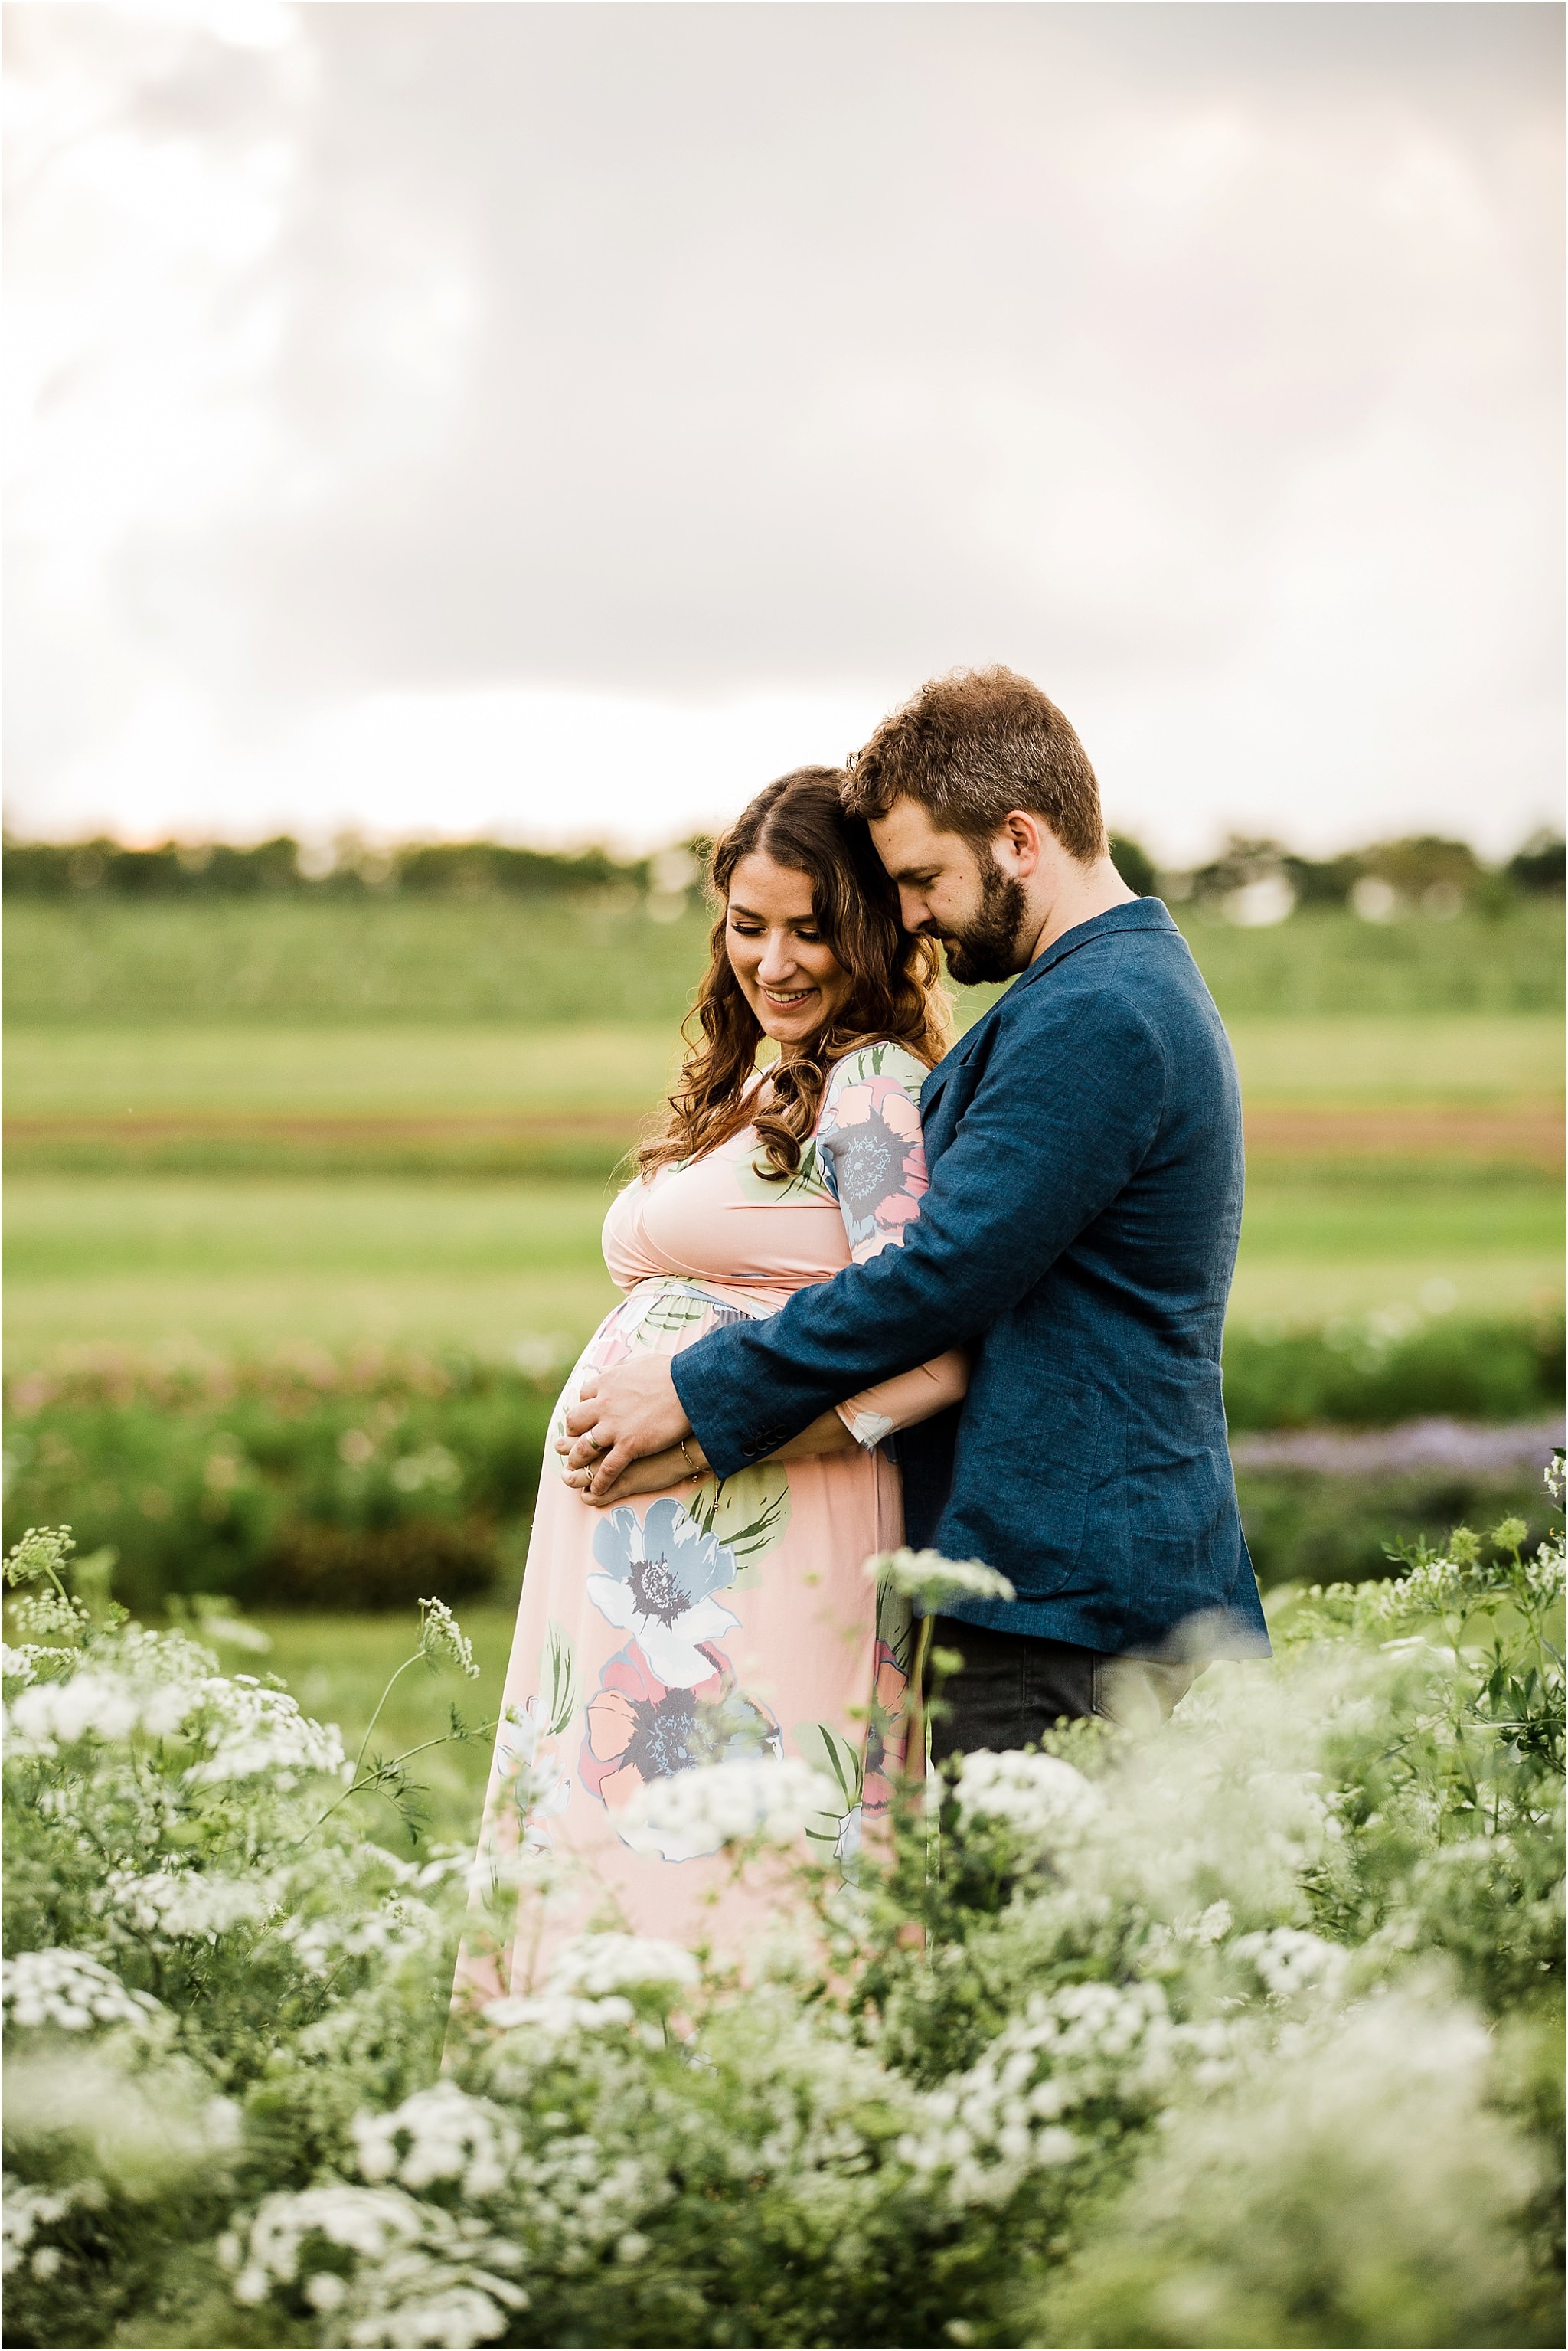 Husband and wife maternity photos at Pittsburgh farm